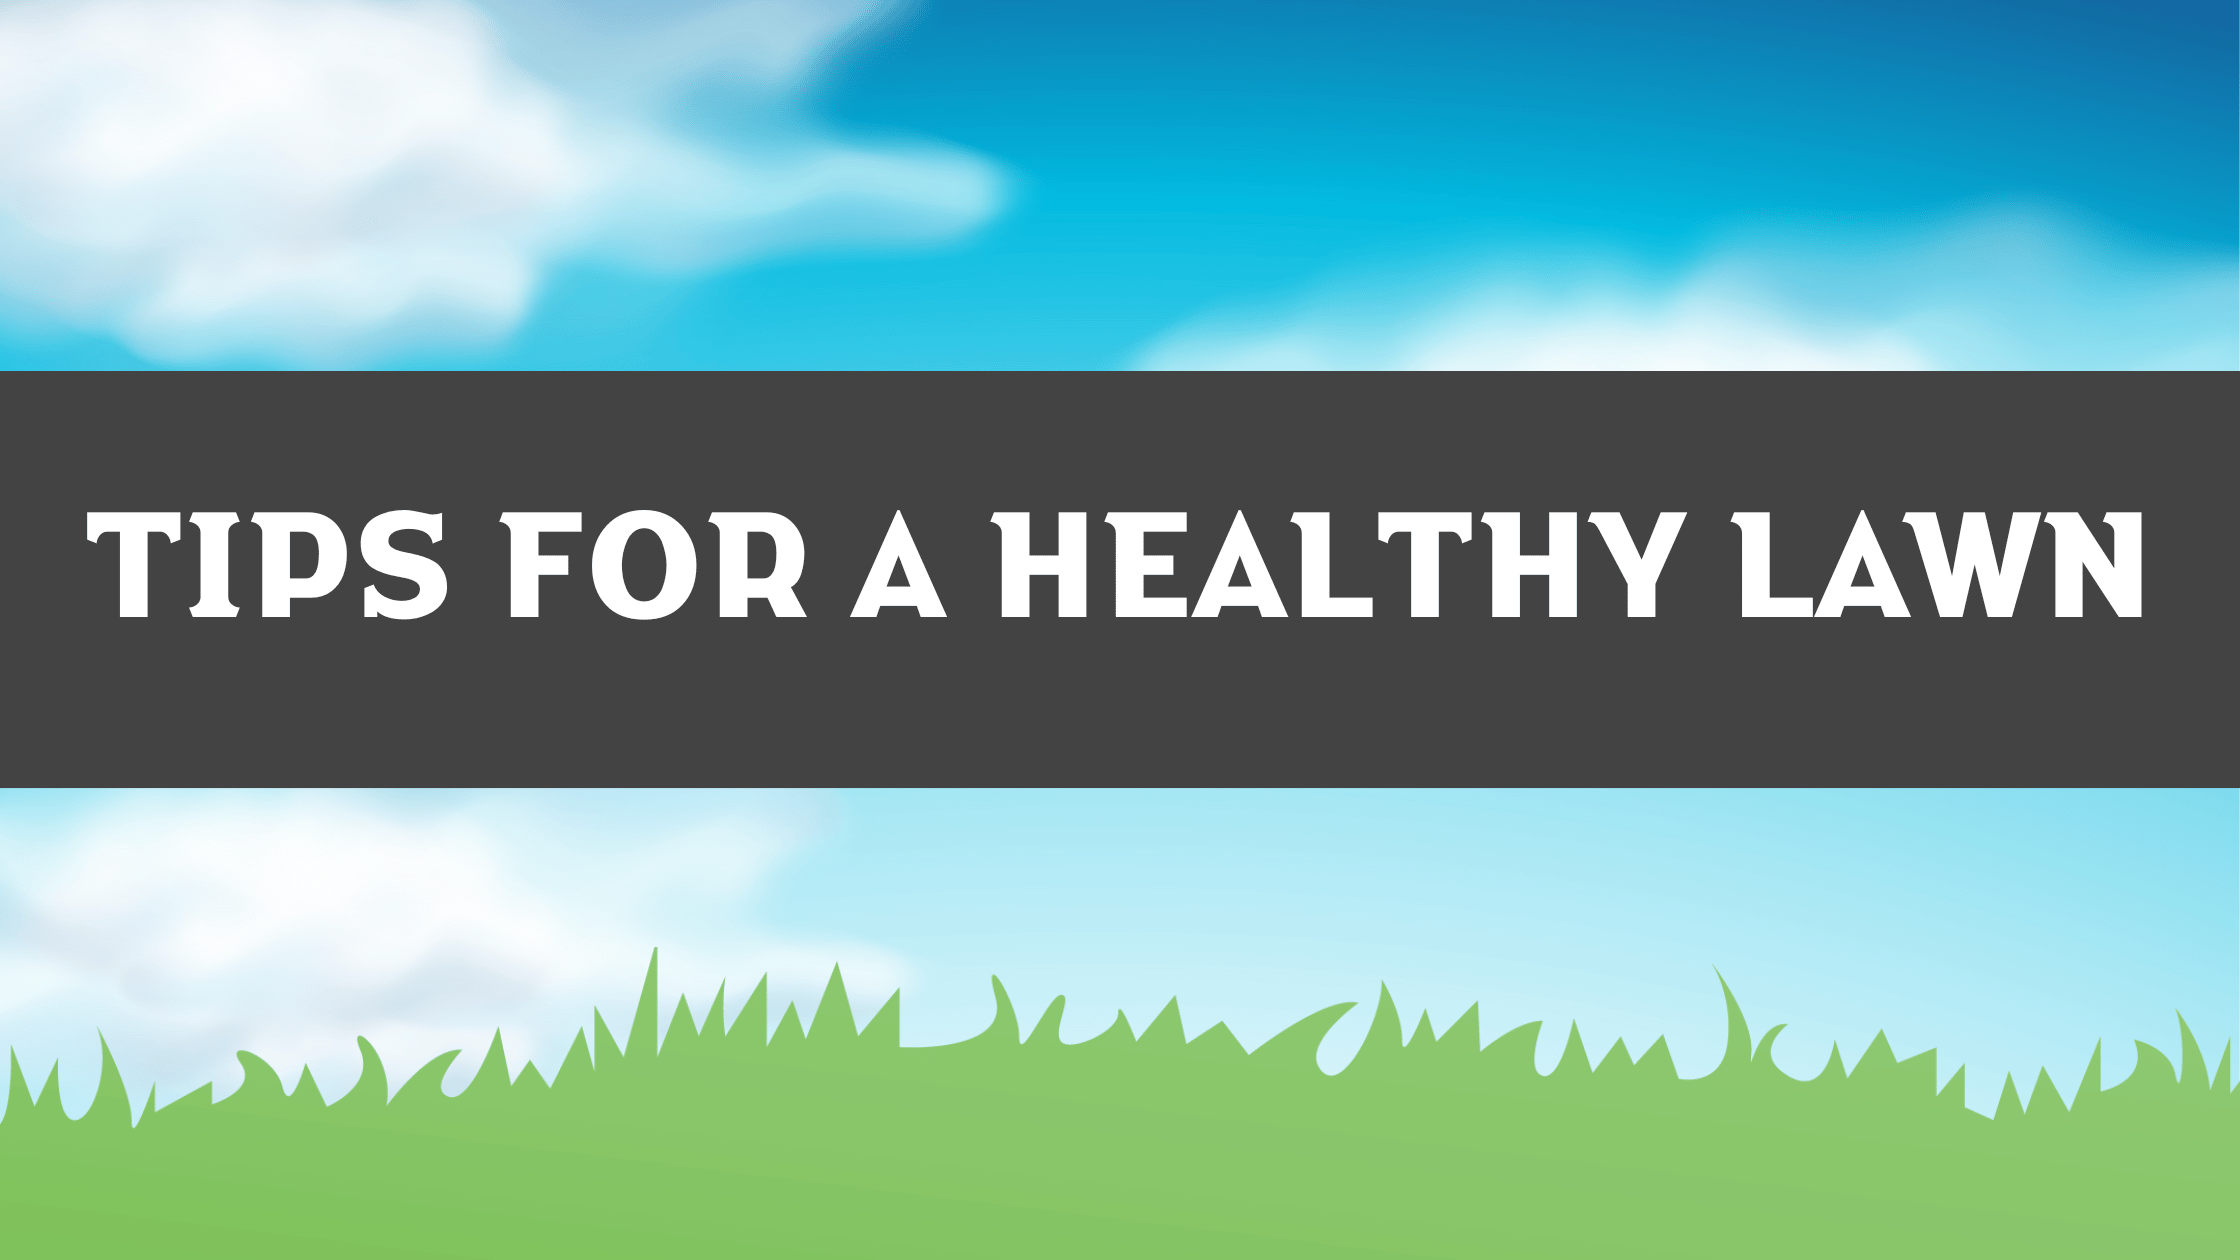 Tips for a Healthy Lawn